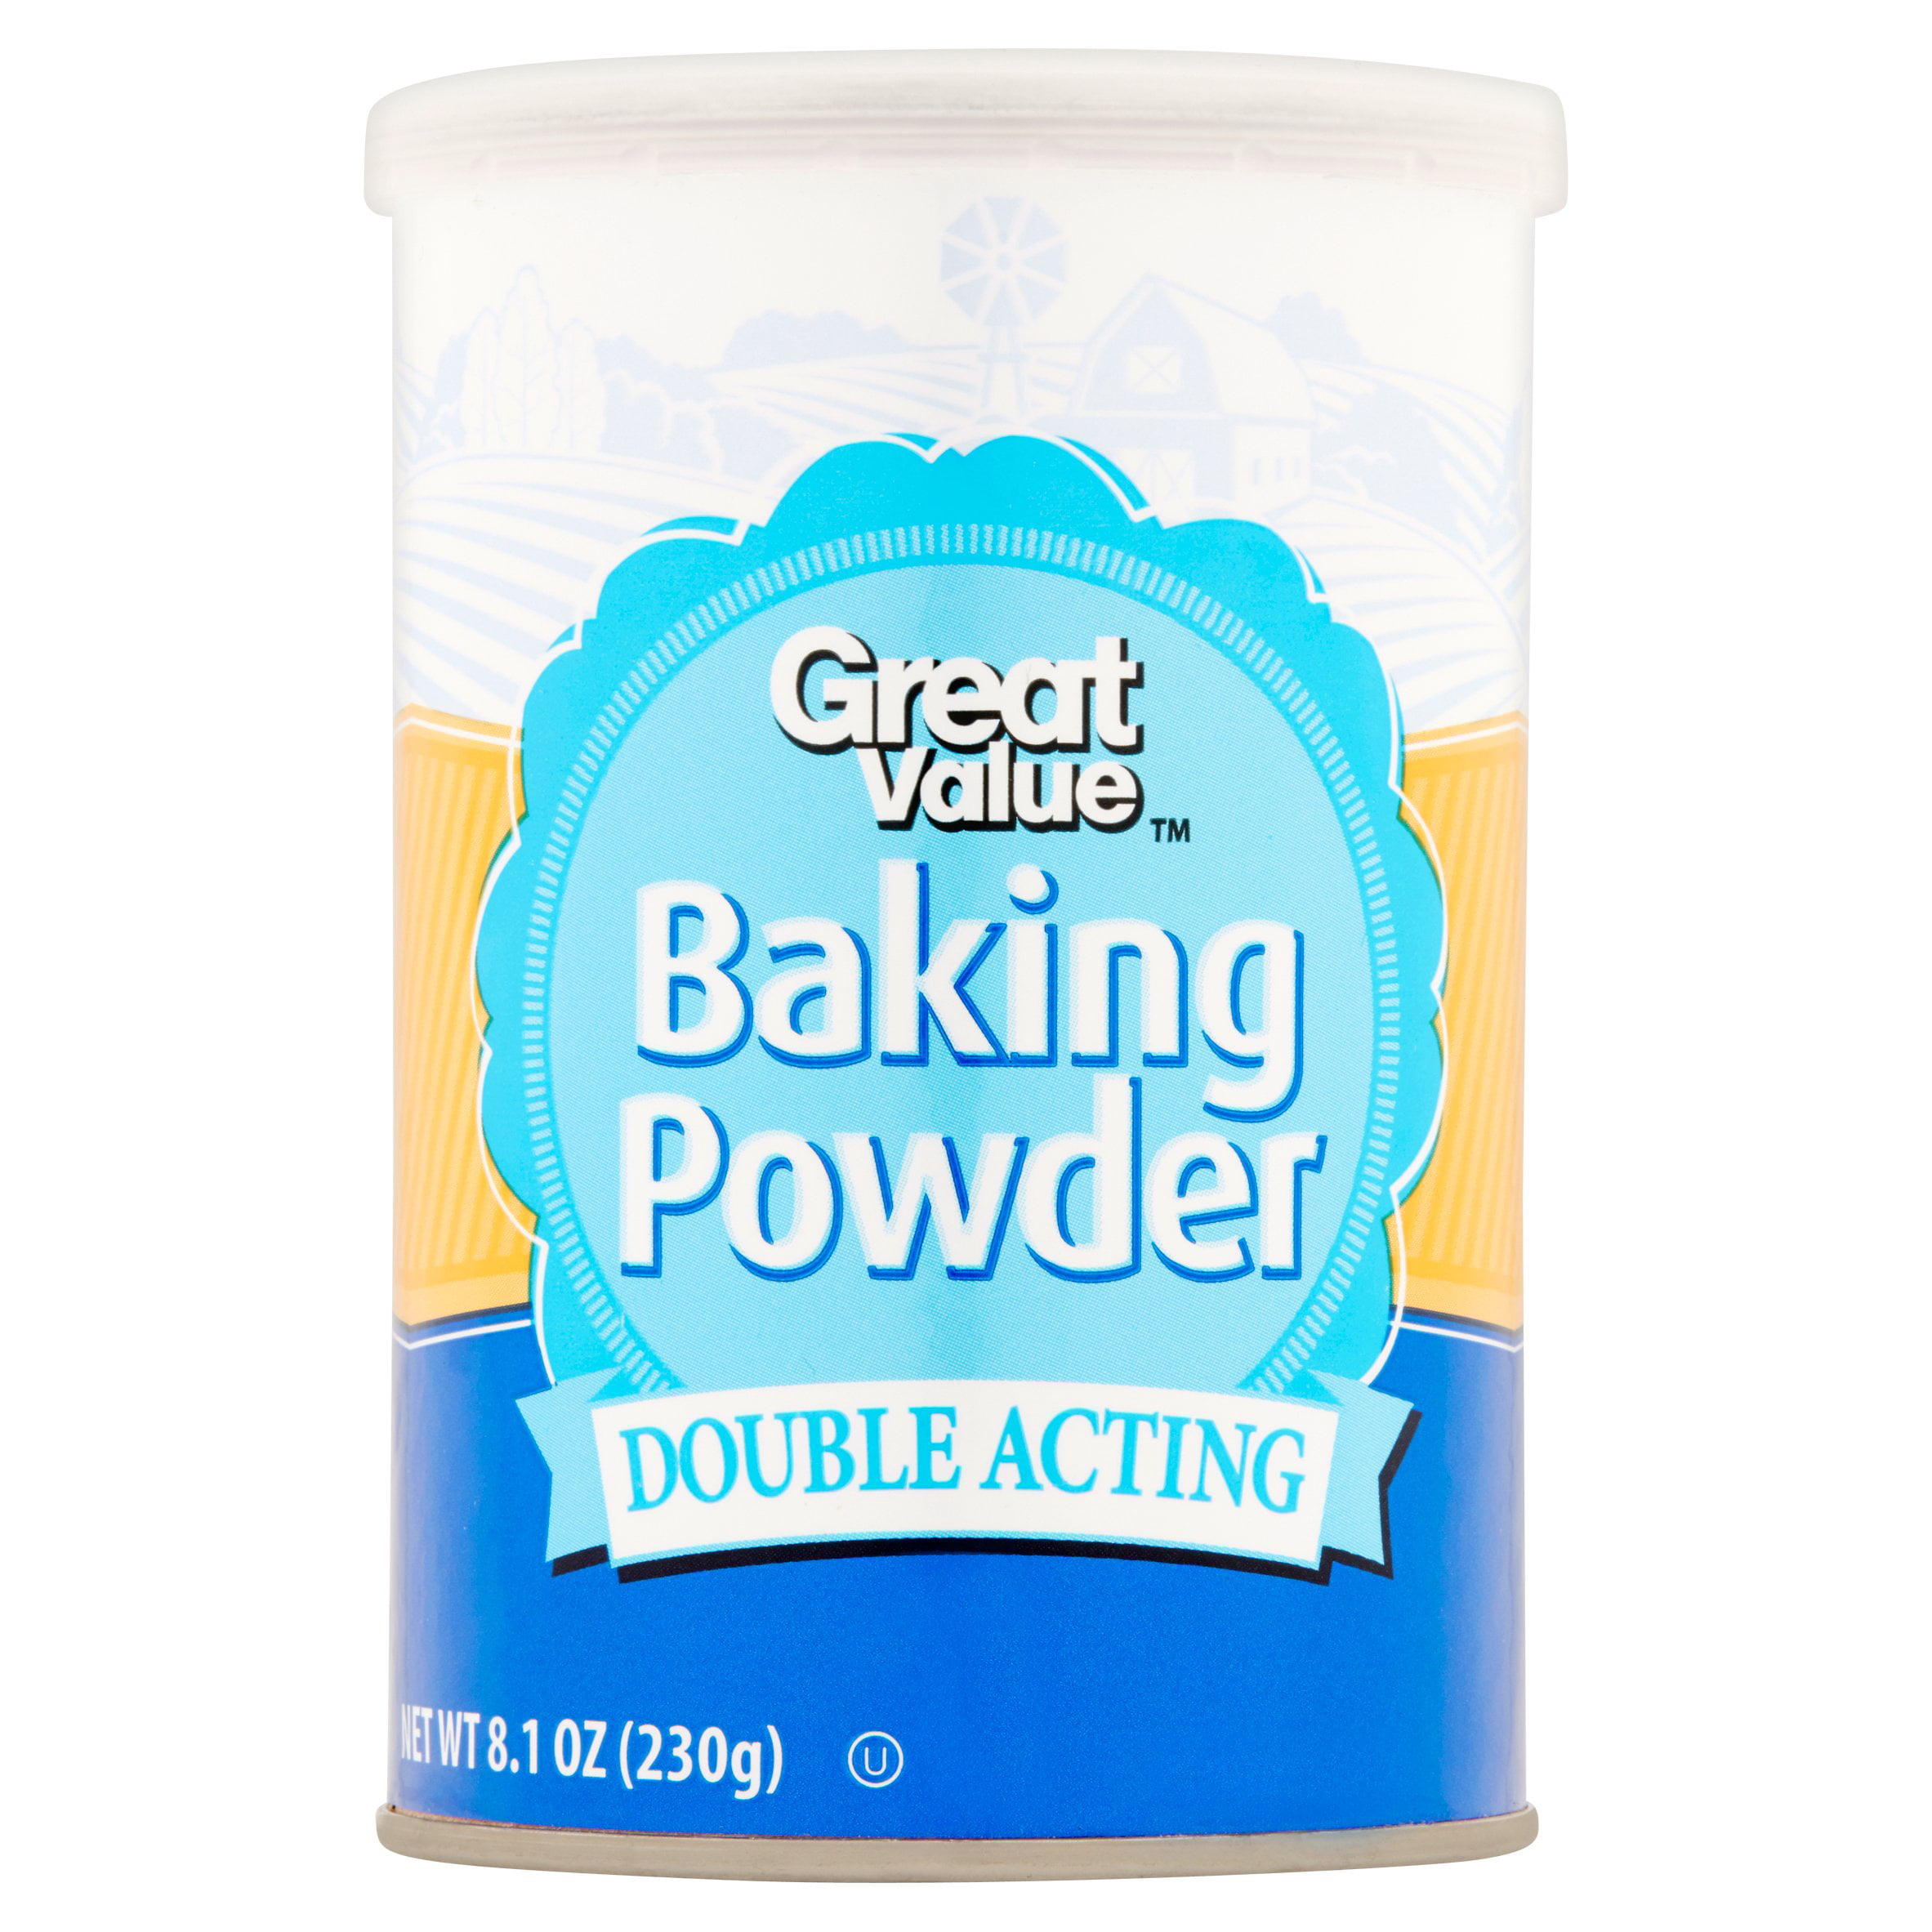 5 Pack Great Value Double Acting Baking Powder 8 1 Oz Walmart Com Walmart Com,How To Attract Hummingbirds In Florida